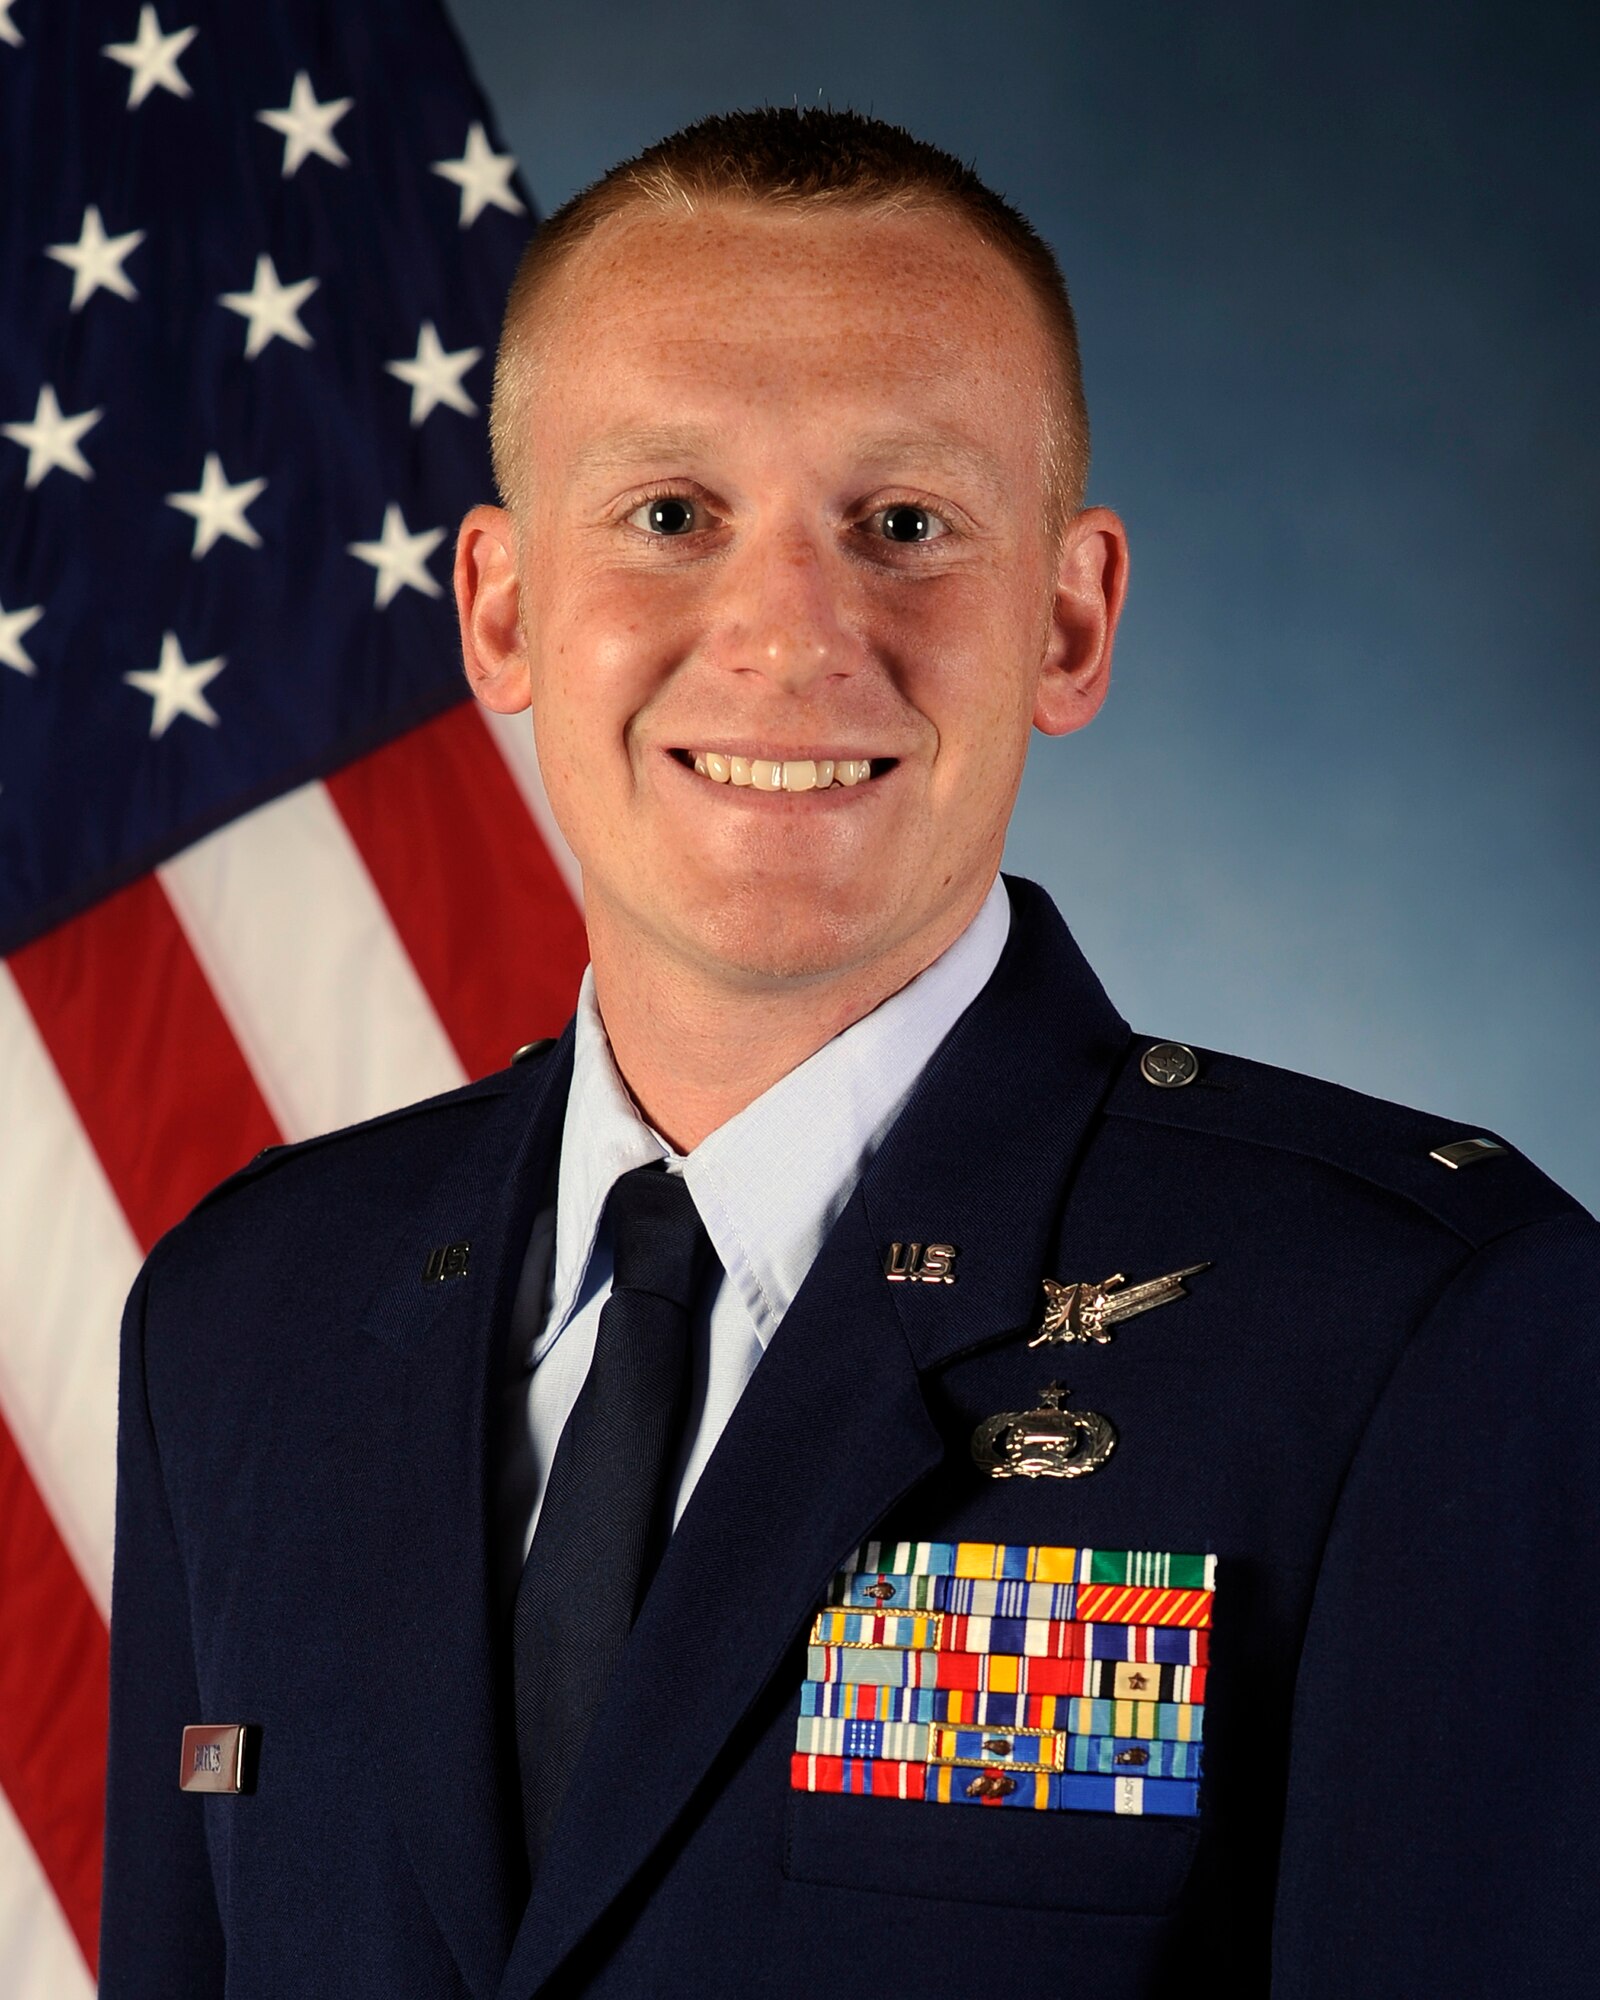 1st Lt. Christopher J. Barnes, 460th Operations Support Squadron, is the 2010 AFSPC Instructor/Evaluator of the Year, Officer Category II Award recipient.

